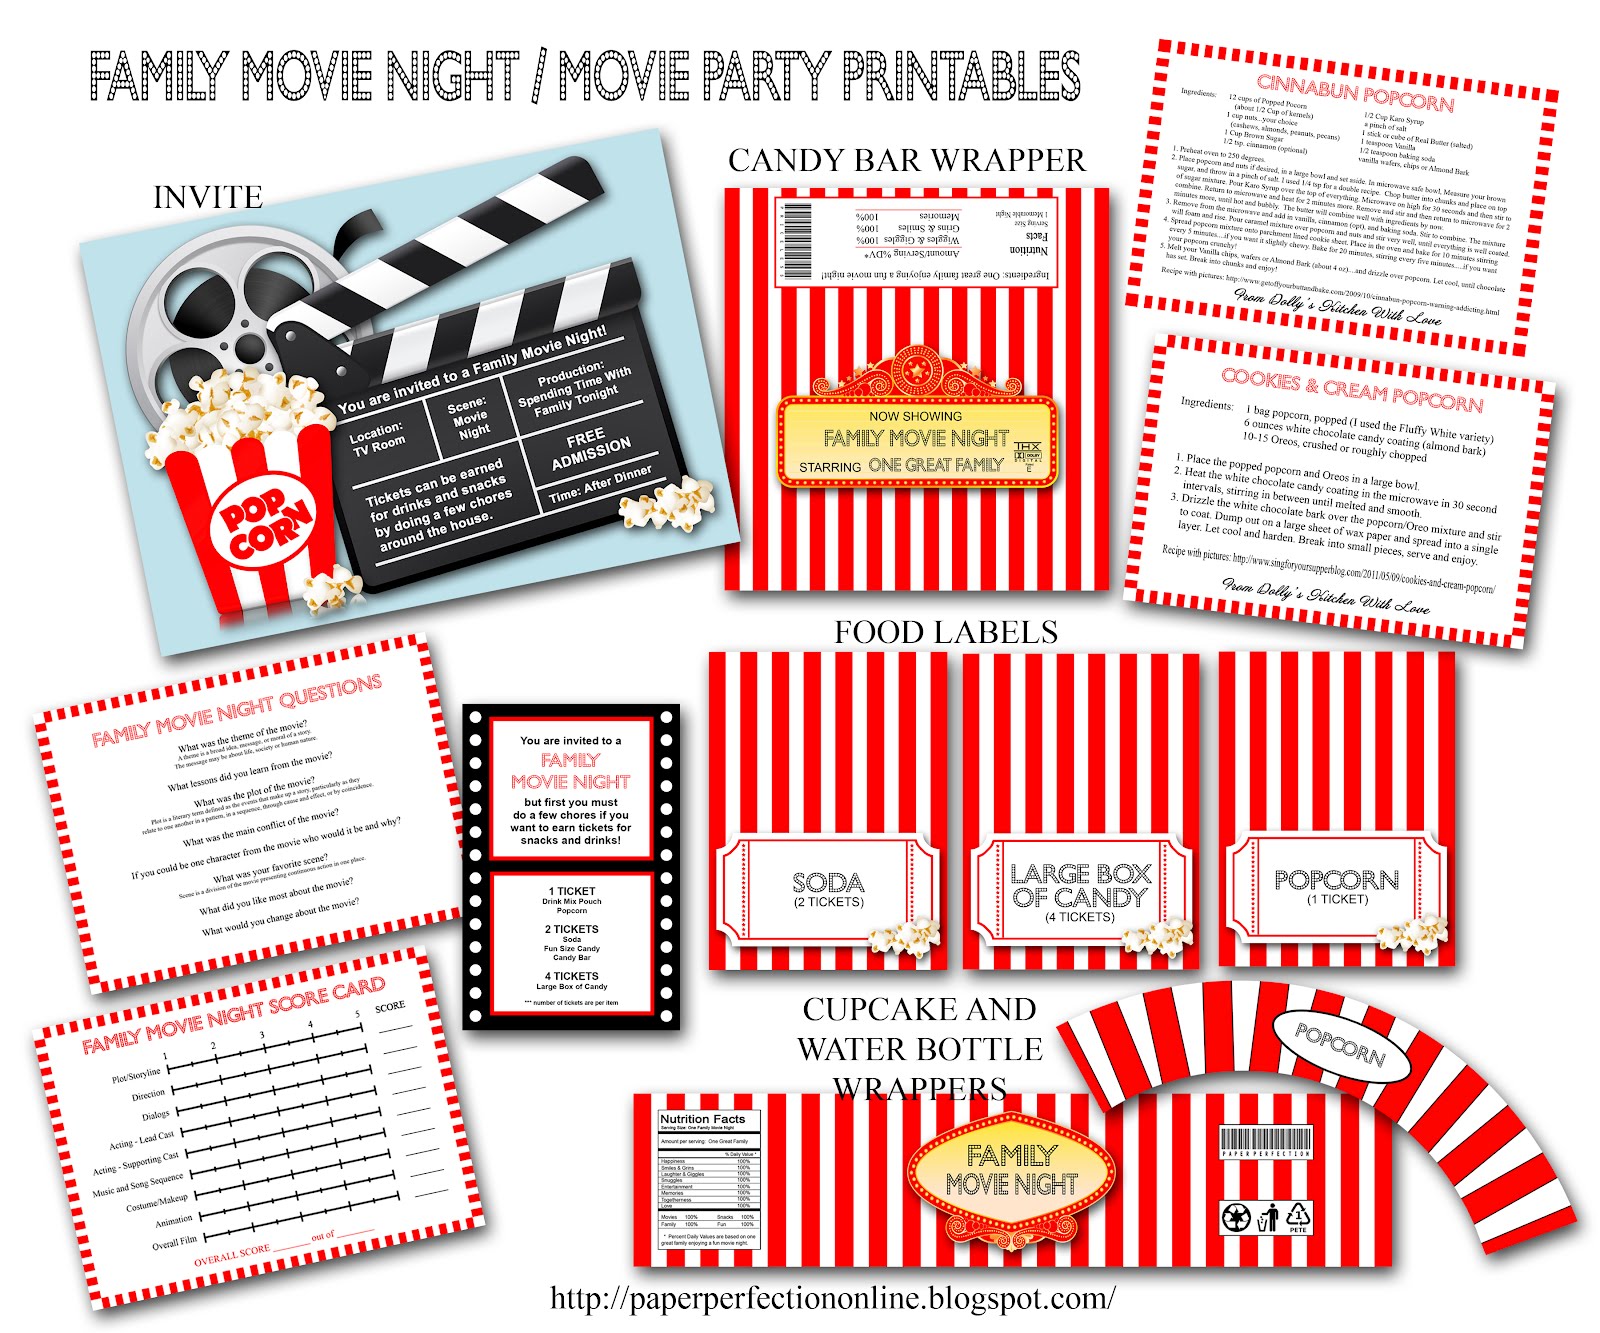 paper-perfection-movie-party-family-movie-night-printables